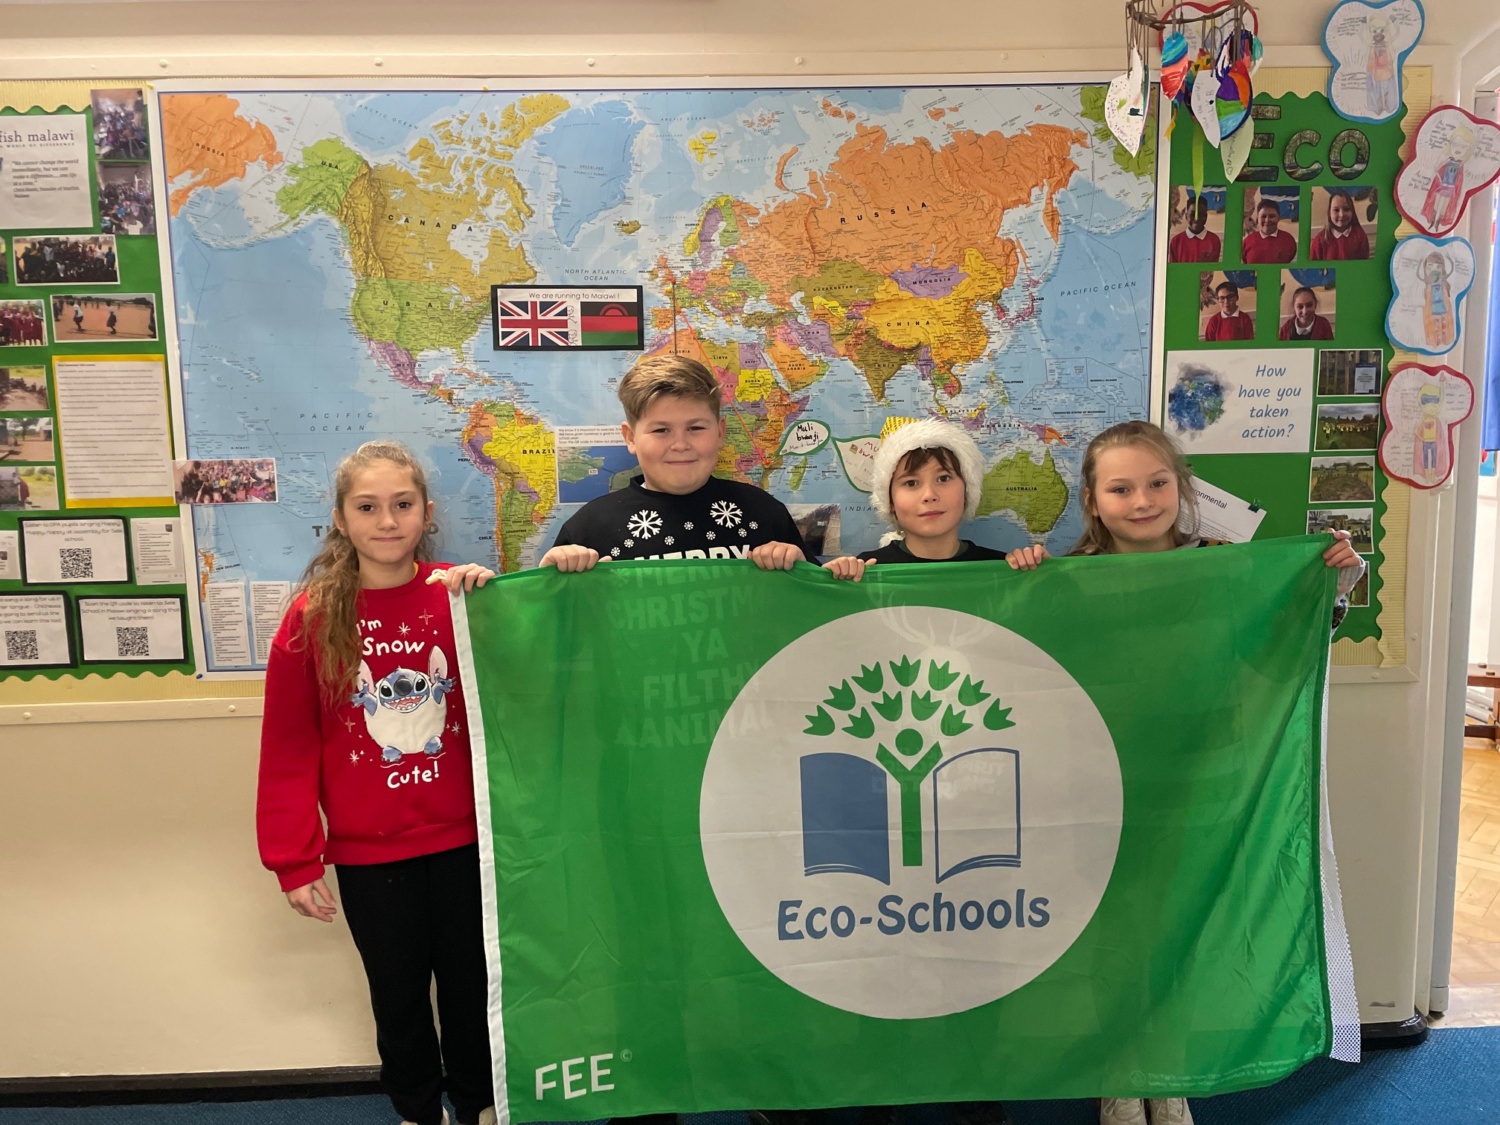 Four Oaks Primary Academy pupils are pictured smiling for the camera and holding up a banner with the Eco Schools logo on it.